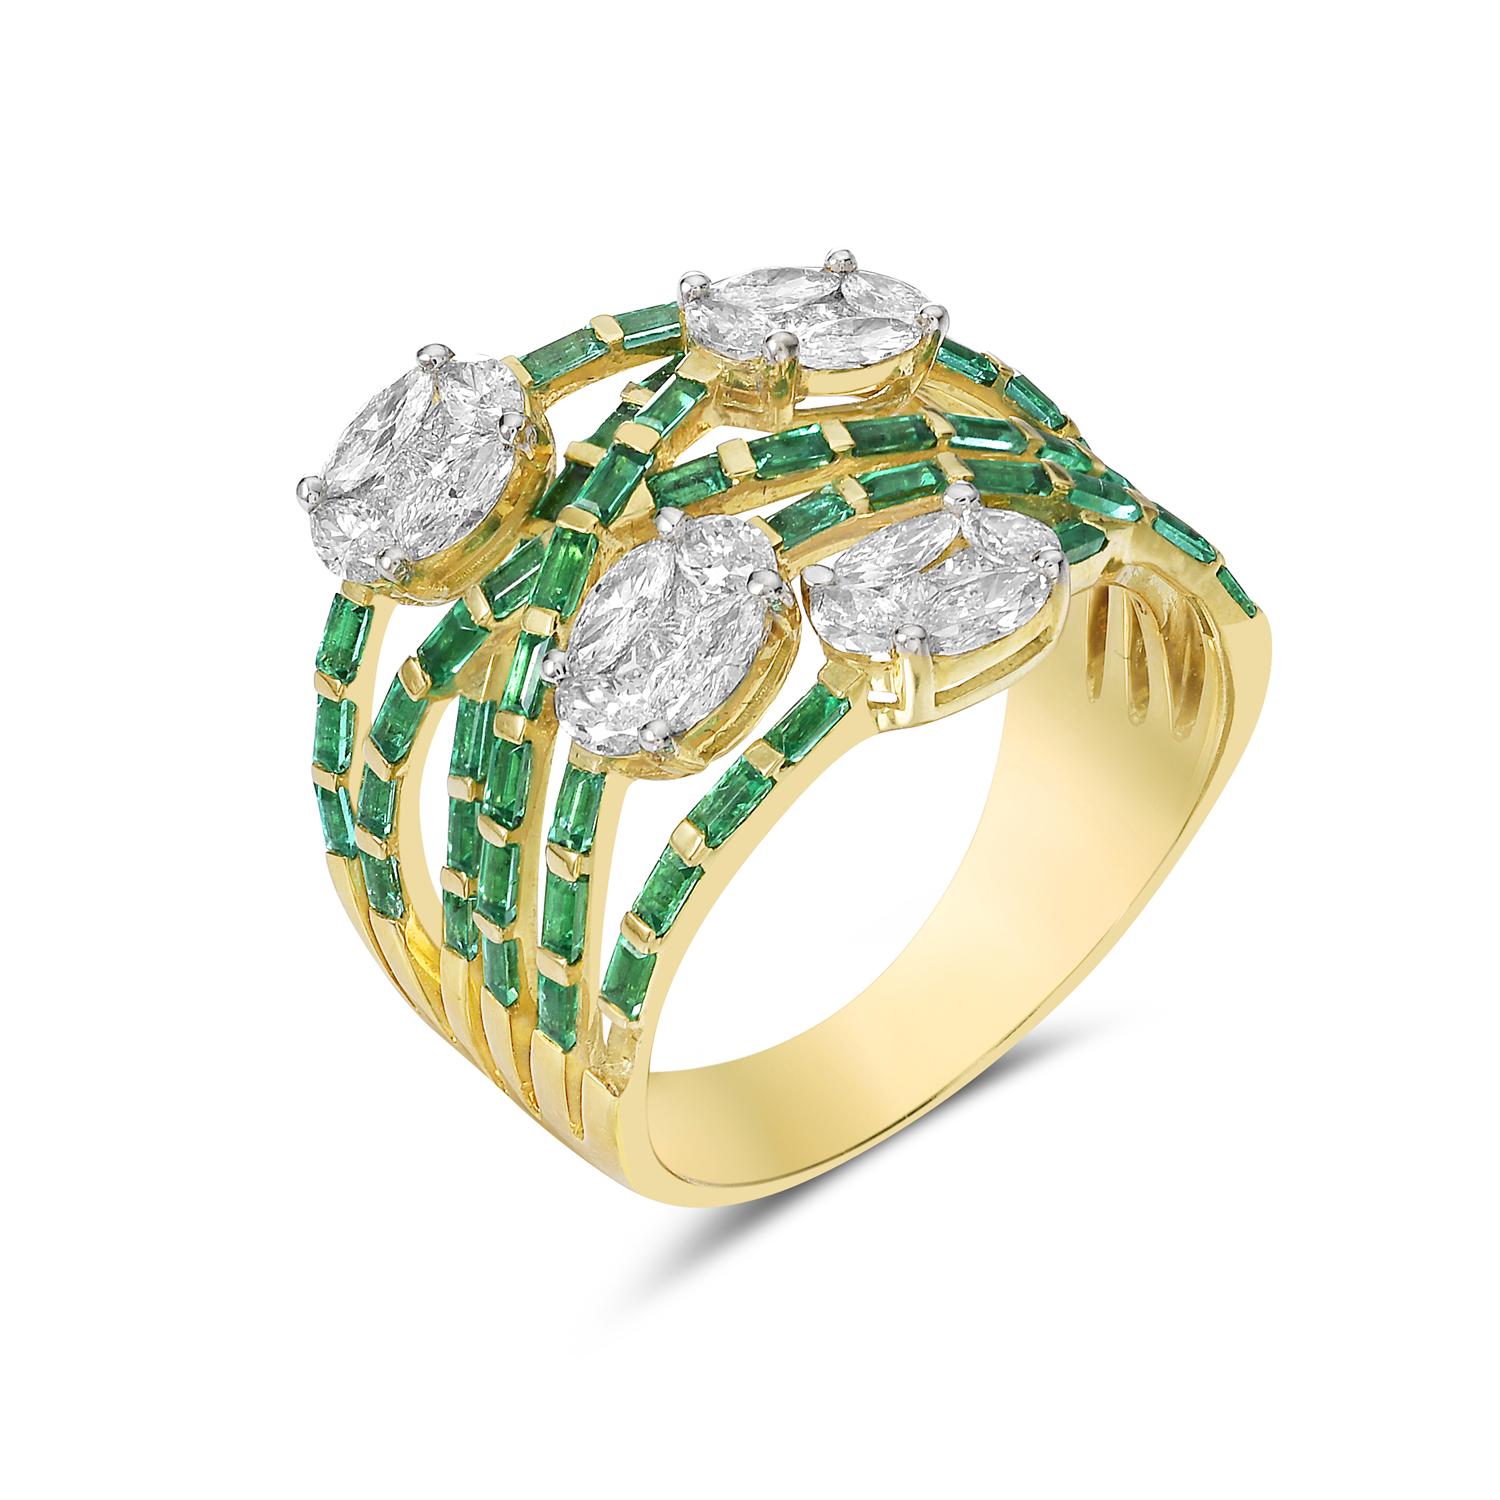 Contemporary Zig Zag Emerald Ring Accented With Diamonds Made In 18k Yellow Gold For Sale